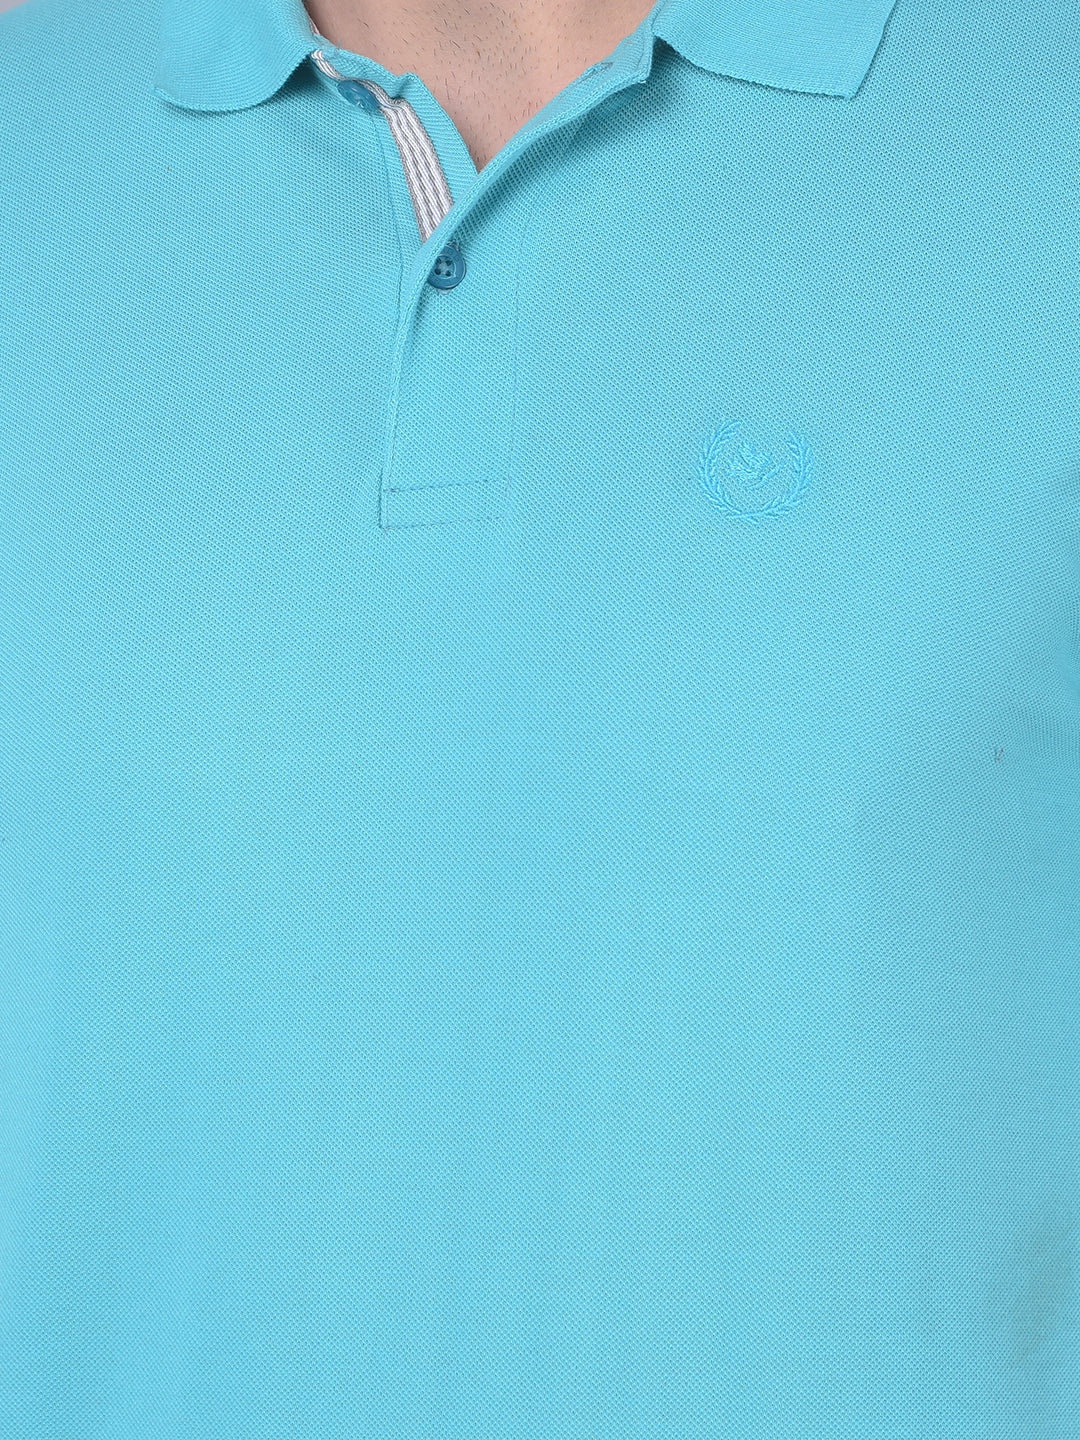 COBB SOLID BRIGHT TURQUOISE POLO NECK T-SHIRT